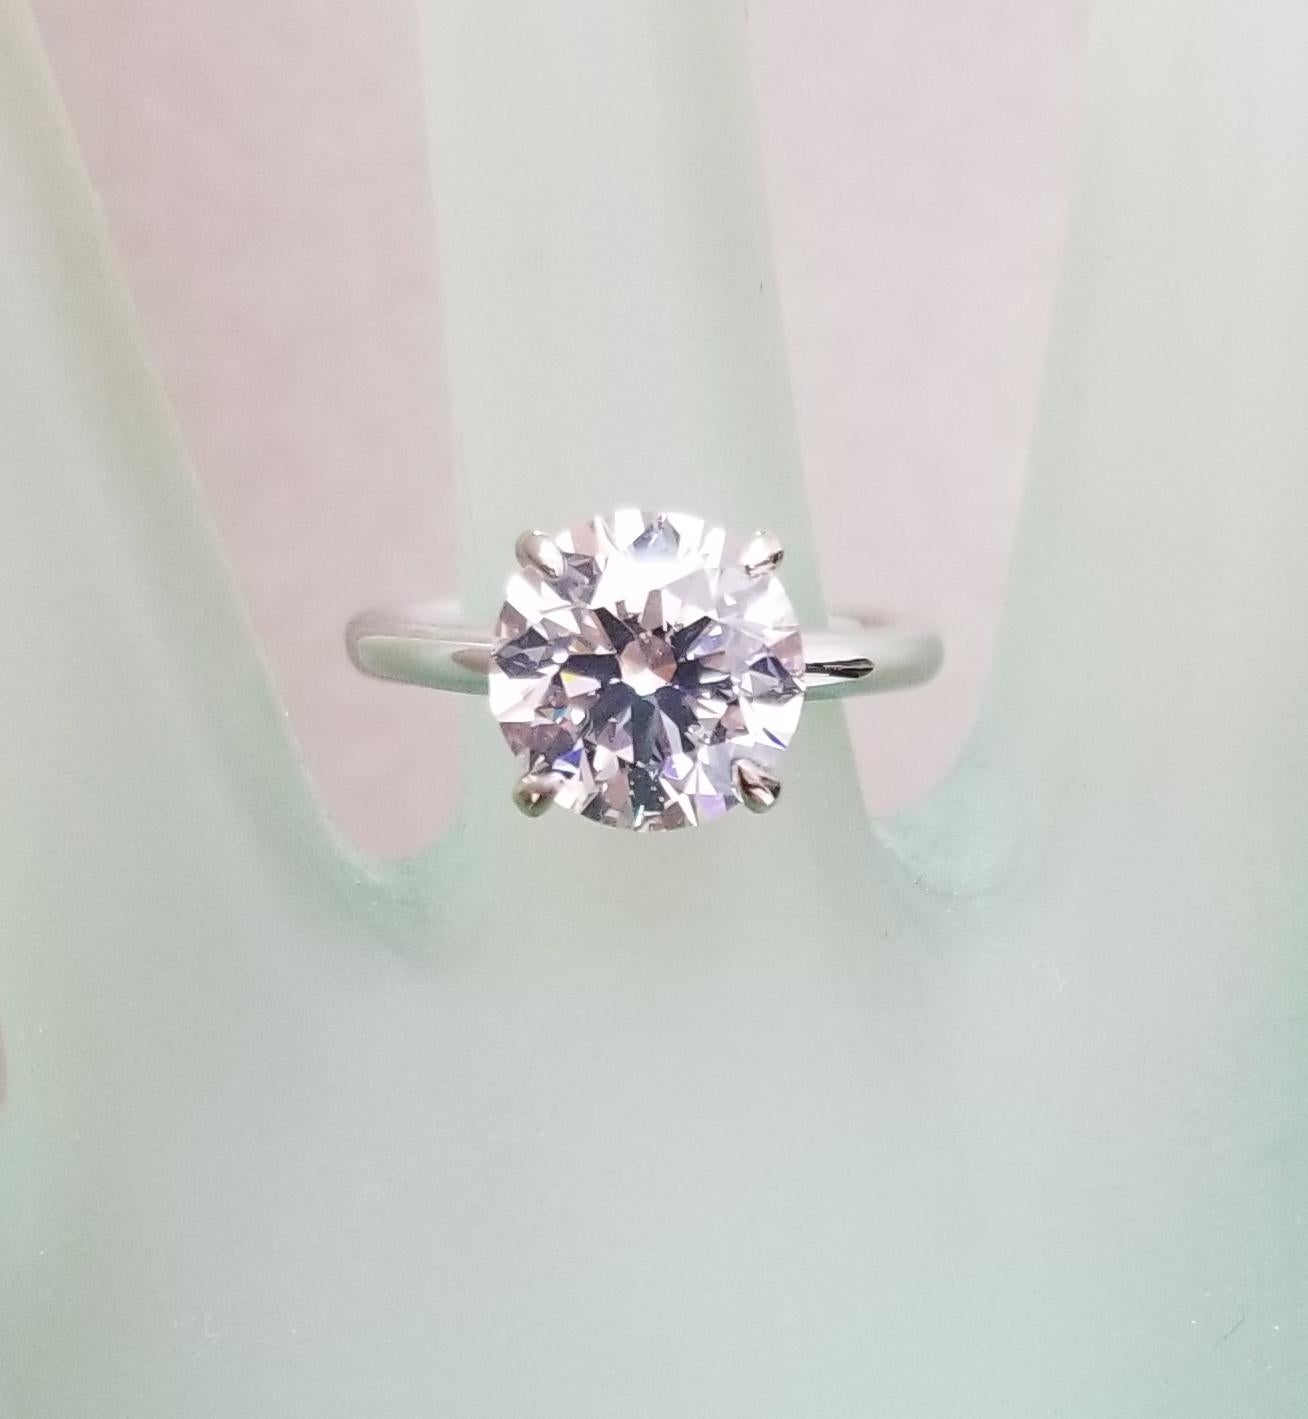 GIA Certified Round 3.60 carat K SI1  Solitaire set in 14k white gold, gorgeous ring sized to fit.  The diamond is a very good K SI1, it shows very well.